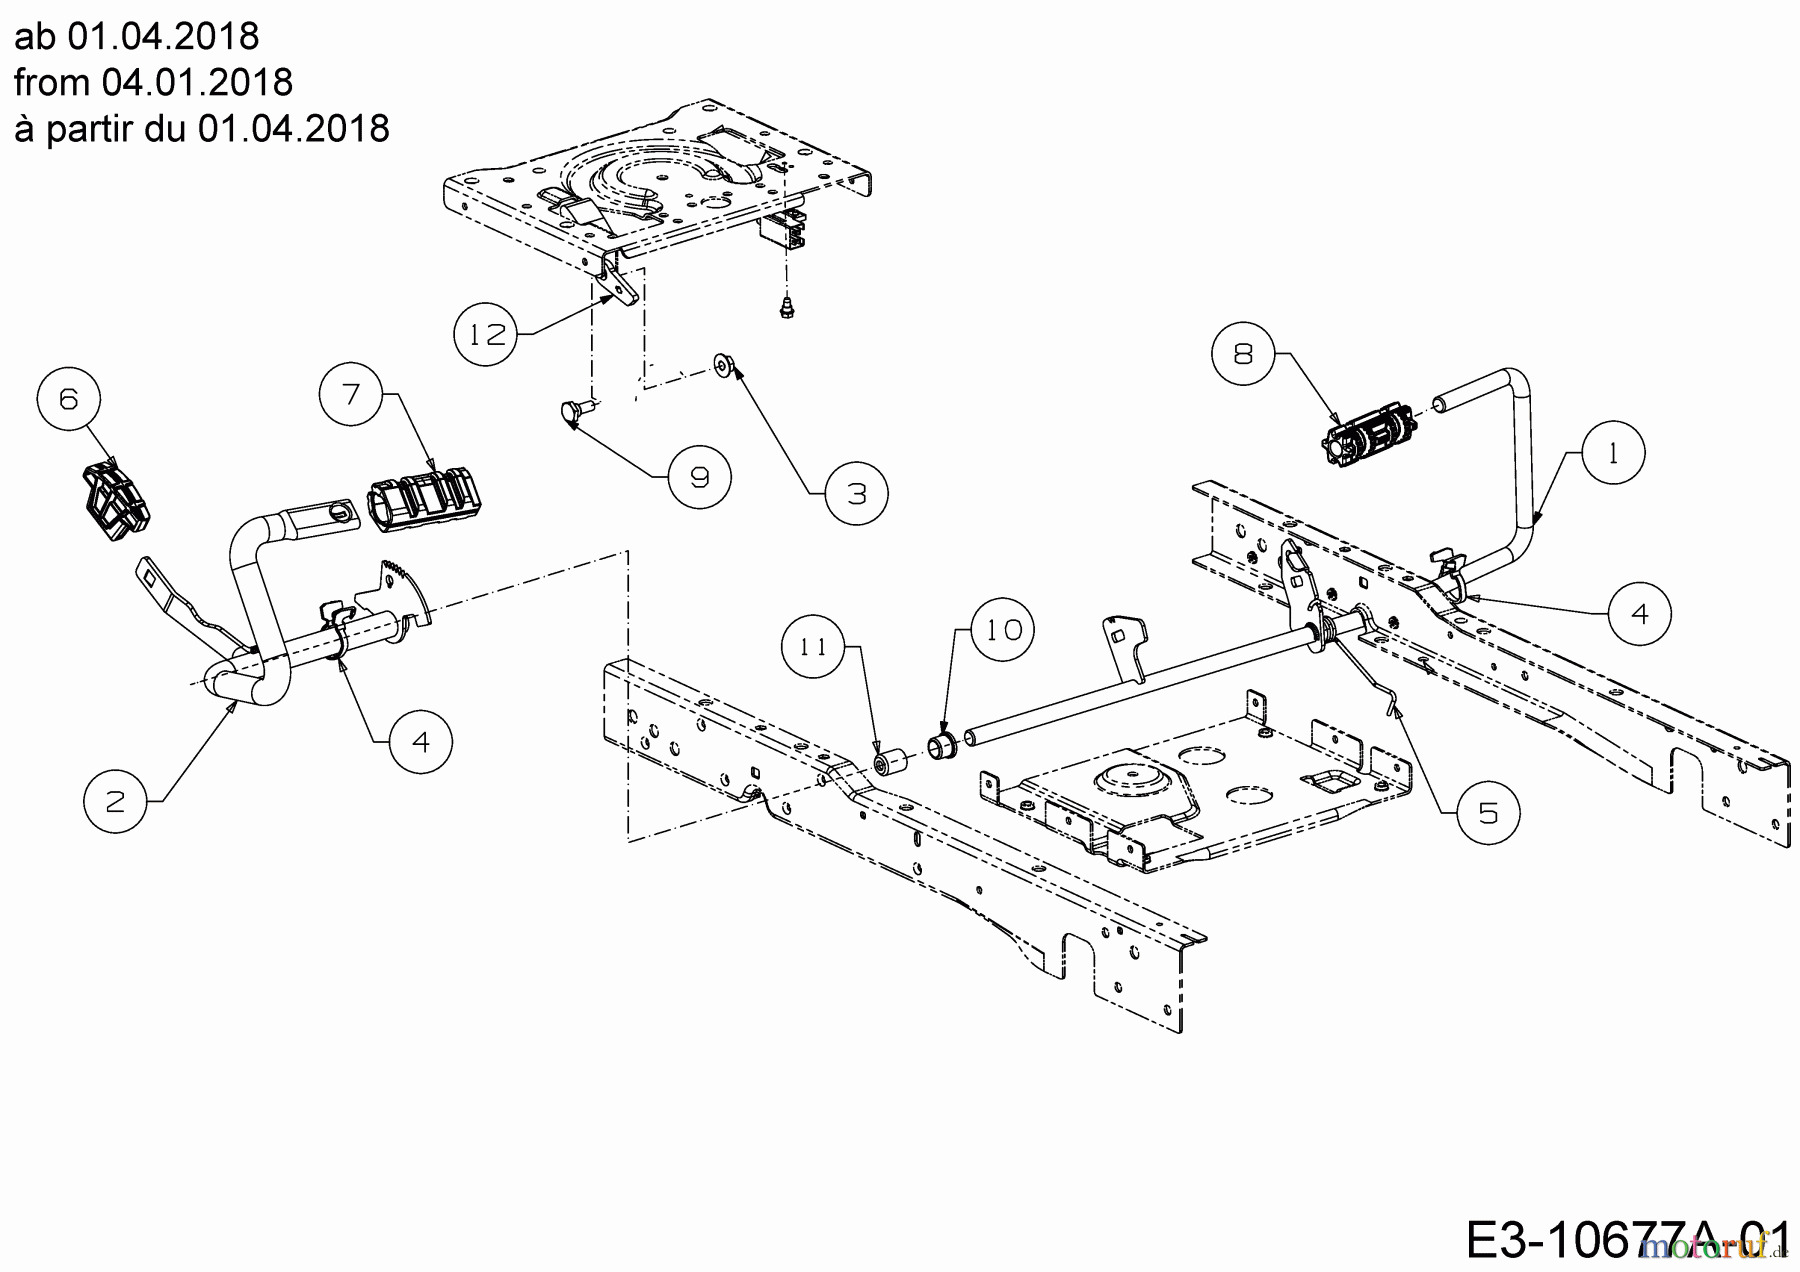  Greenbase Lawn tractors V 162 C 13A8A1KF618 (2020) Pedals from 04.01.2018